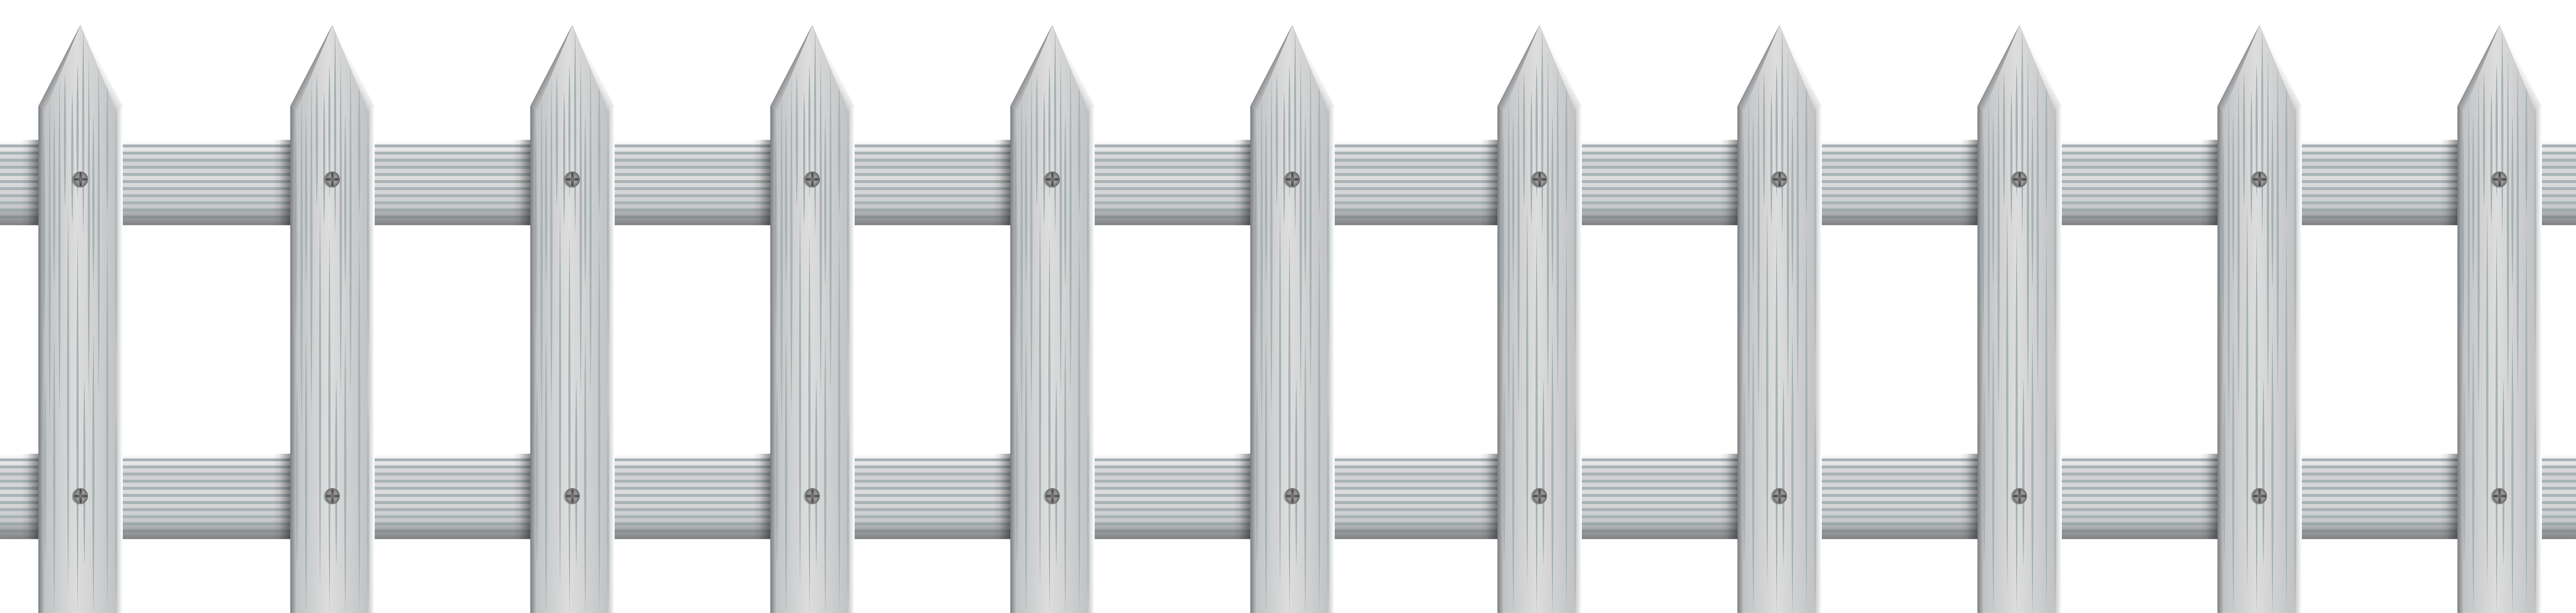 White Fence PNG Clip Art Image | Gallery Yopriceville - High 